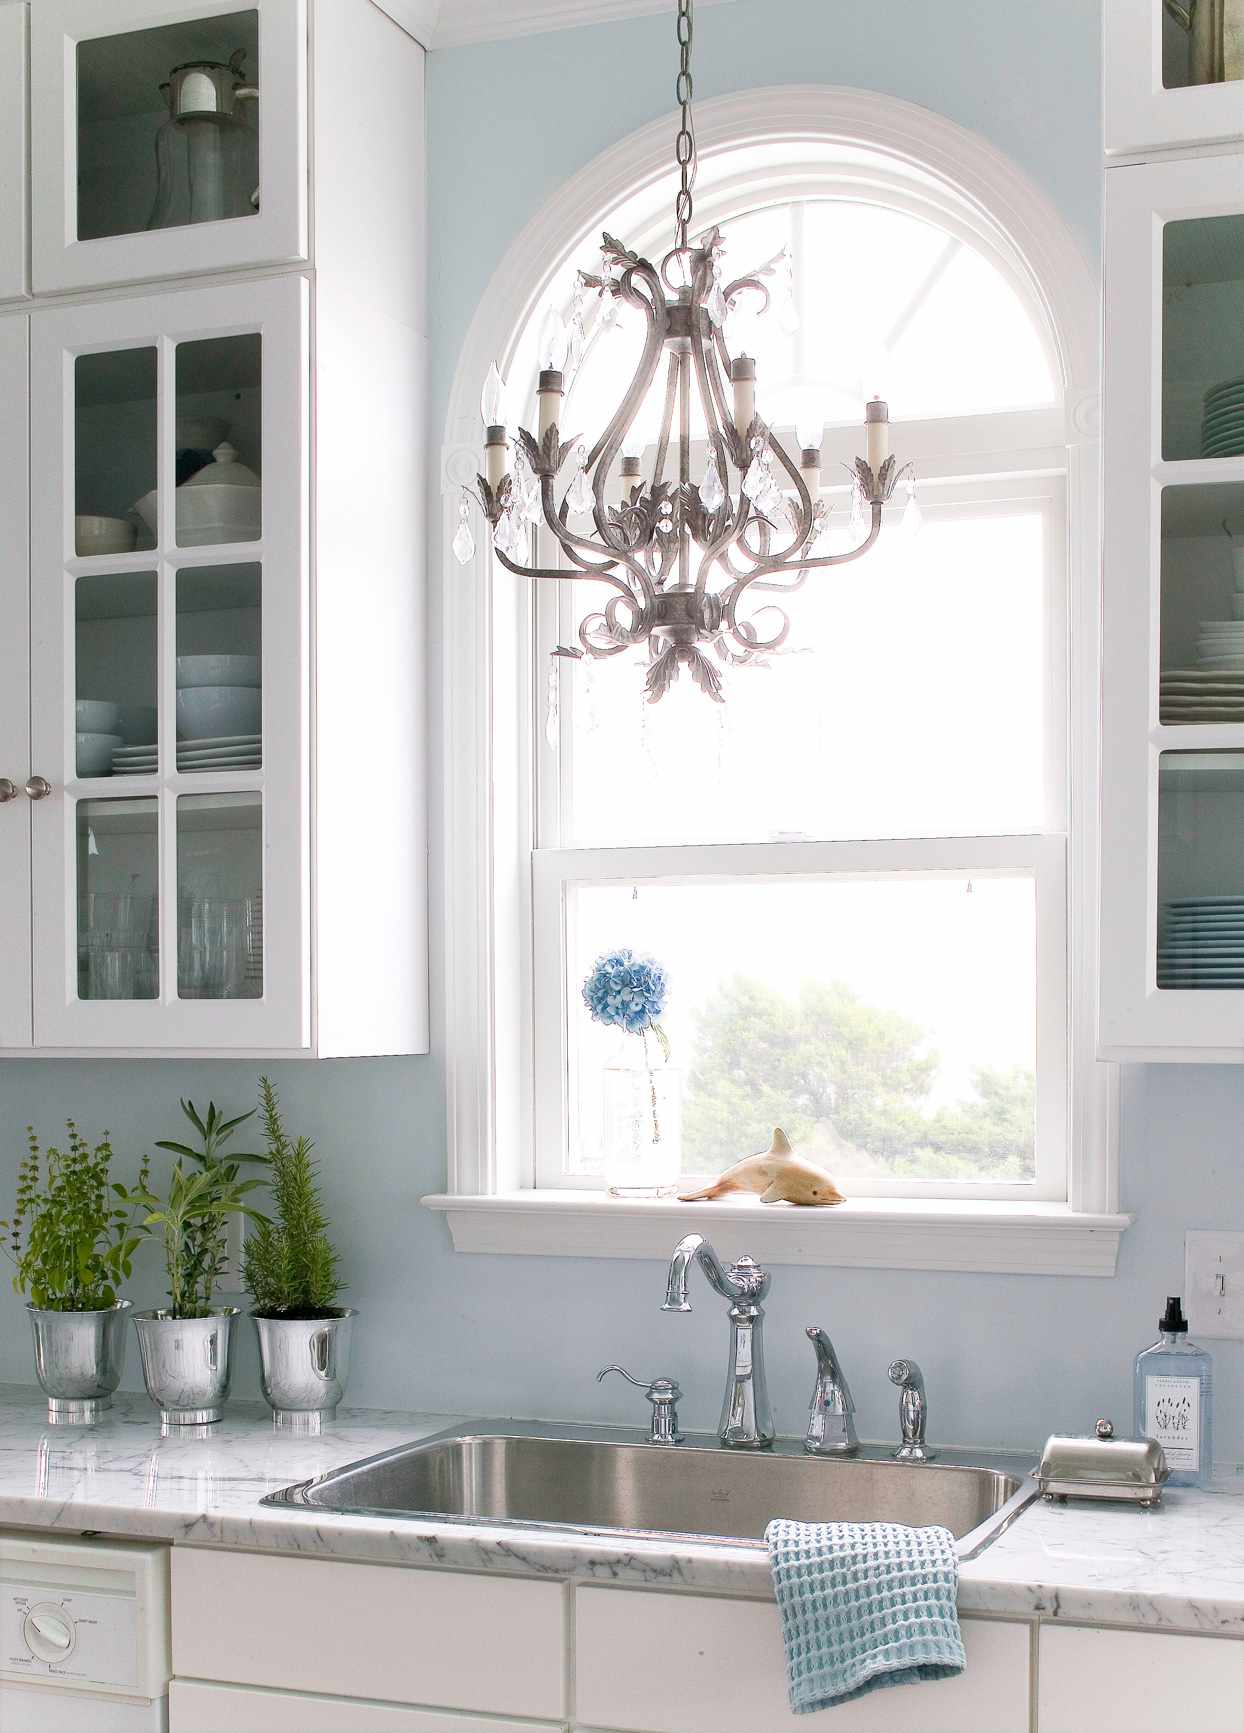 kitchen sink with window and chandelier